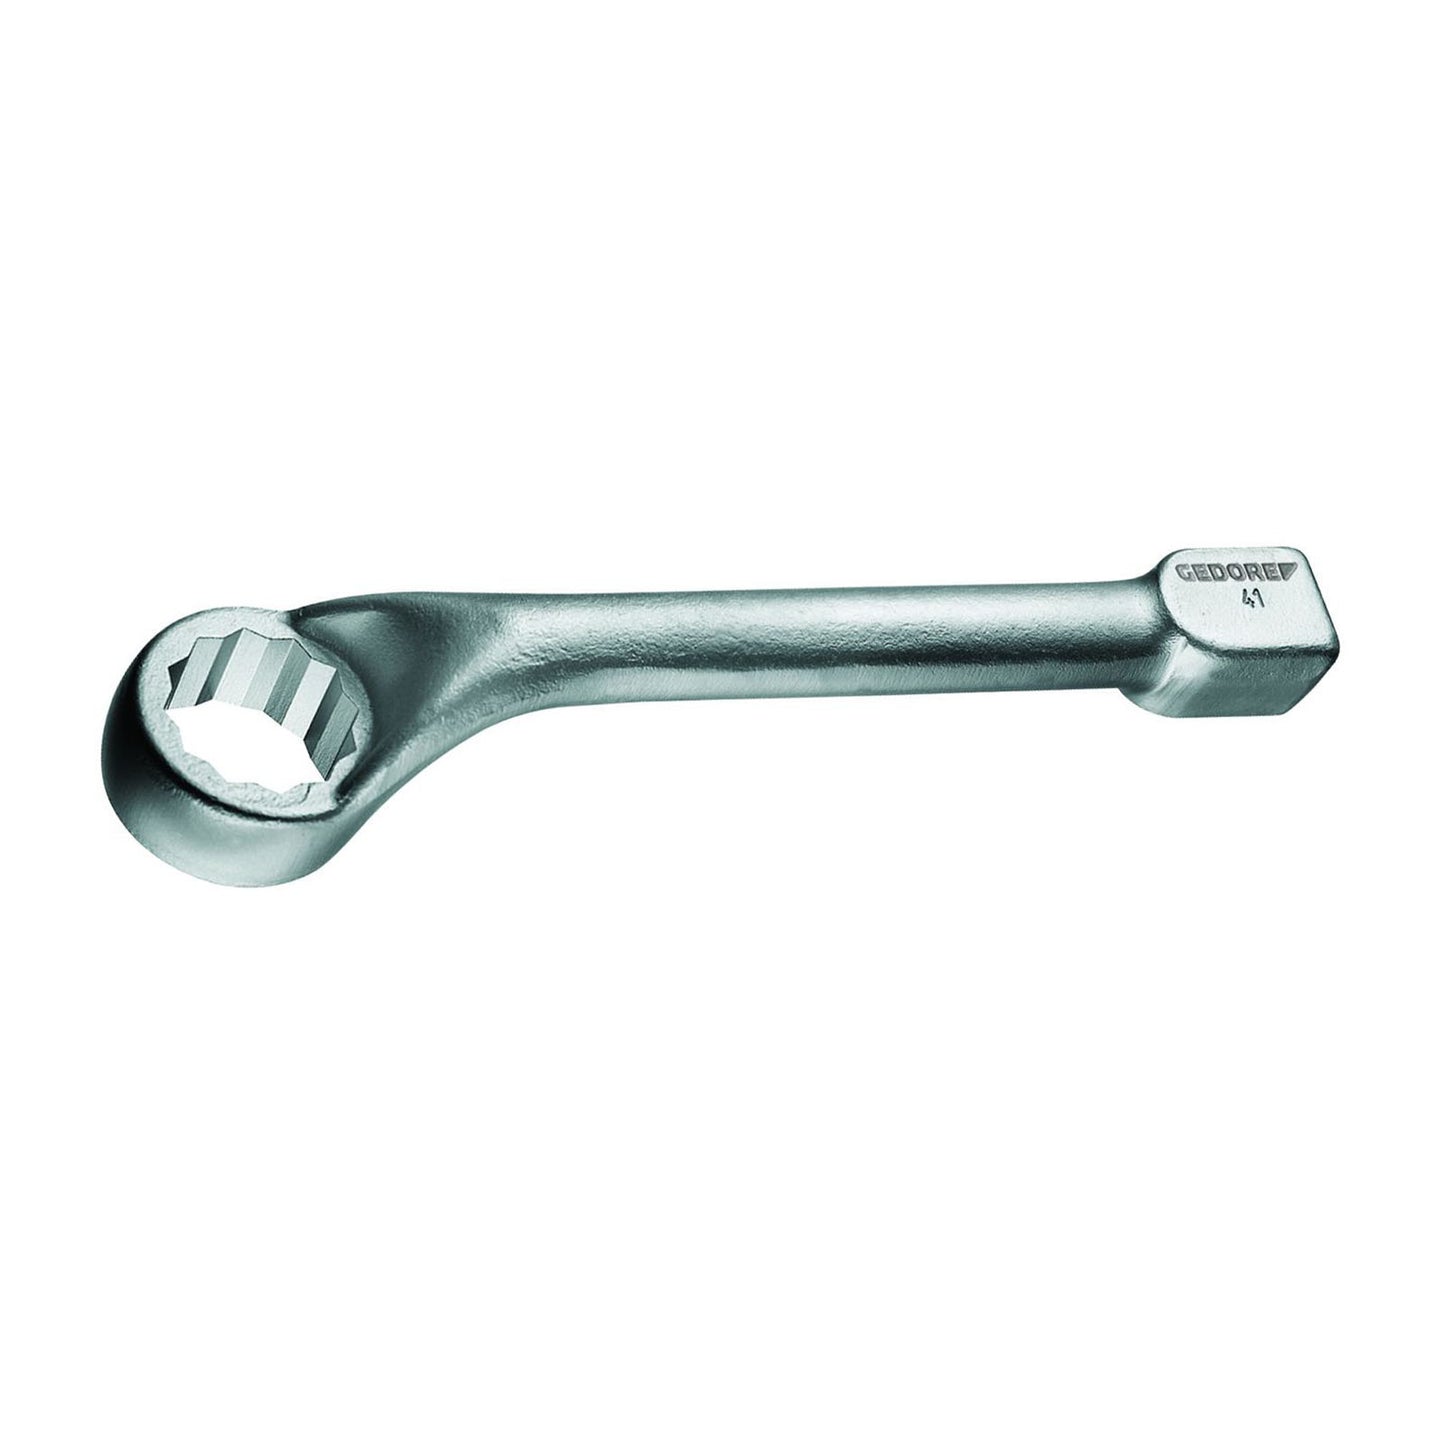 GEDORE 306 G 36 - Offset Wrench, 36mm (1416014)